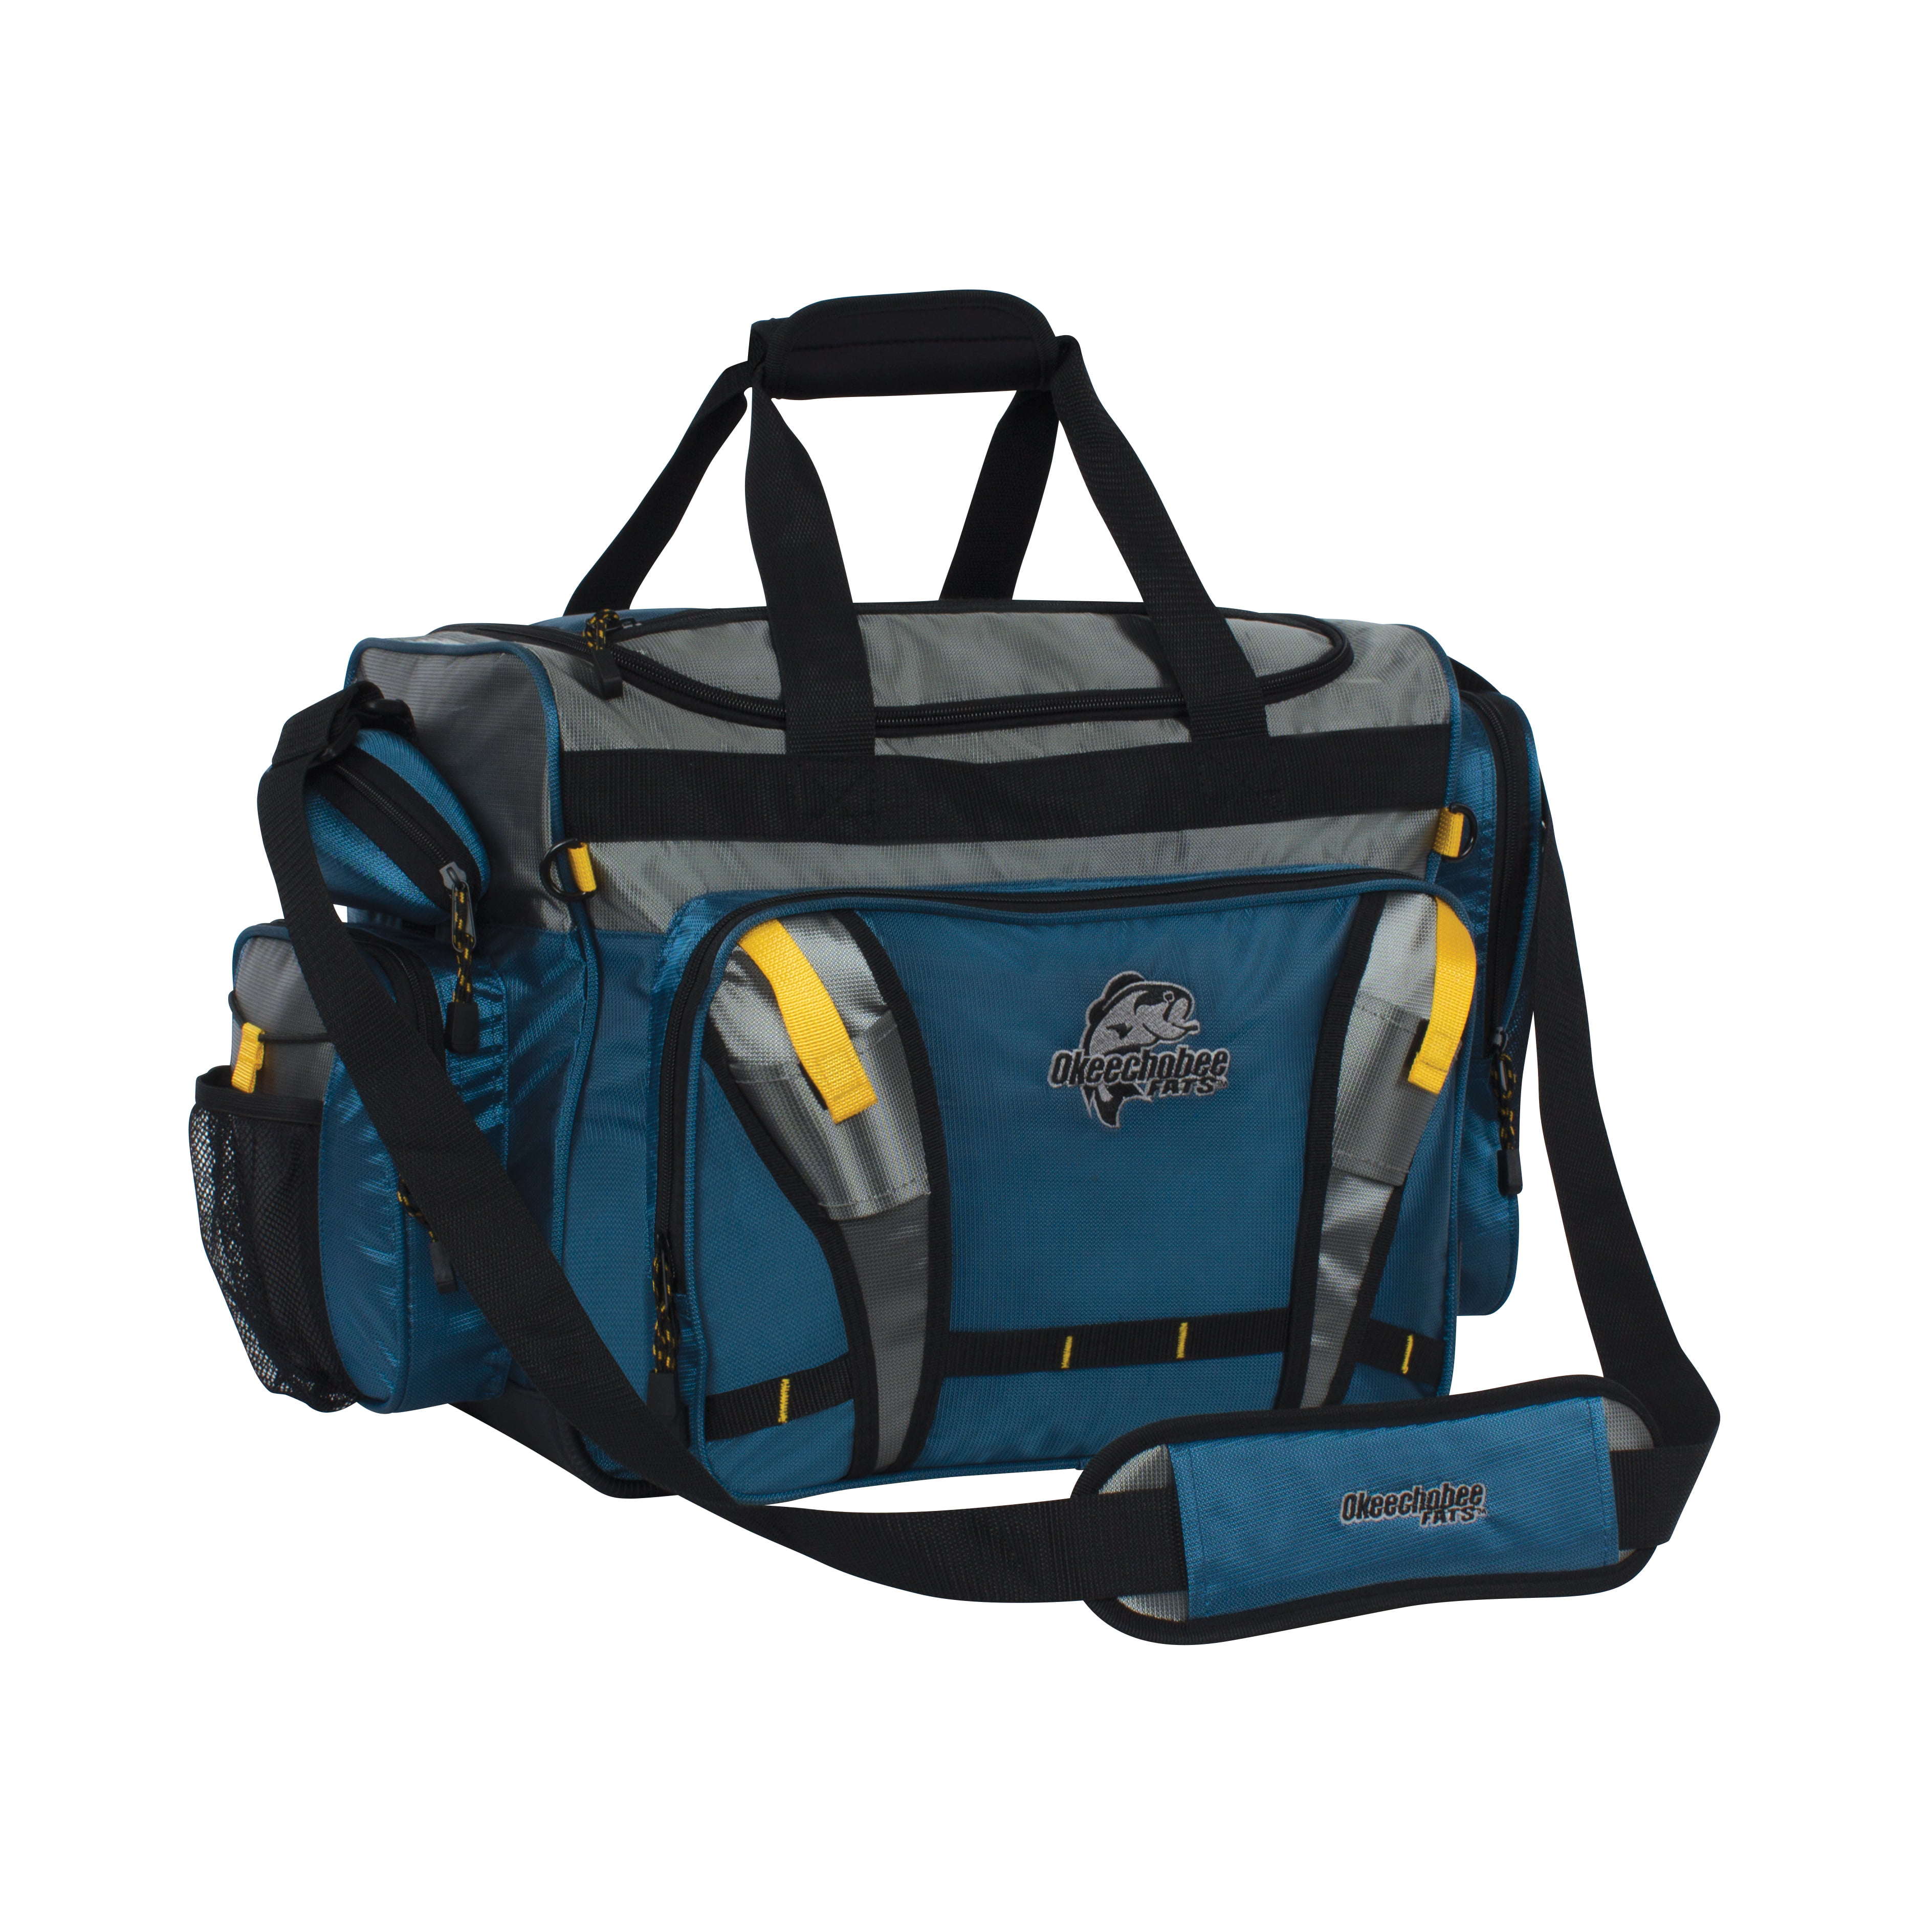 Okeechobee Fats XL Fishing Tackle Bag with 4 Large Lure Box, Blue